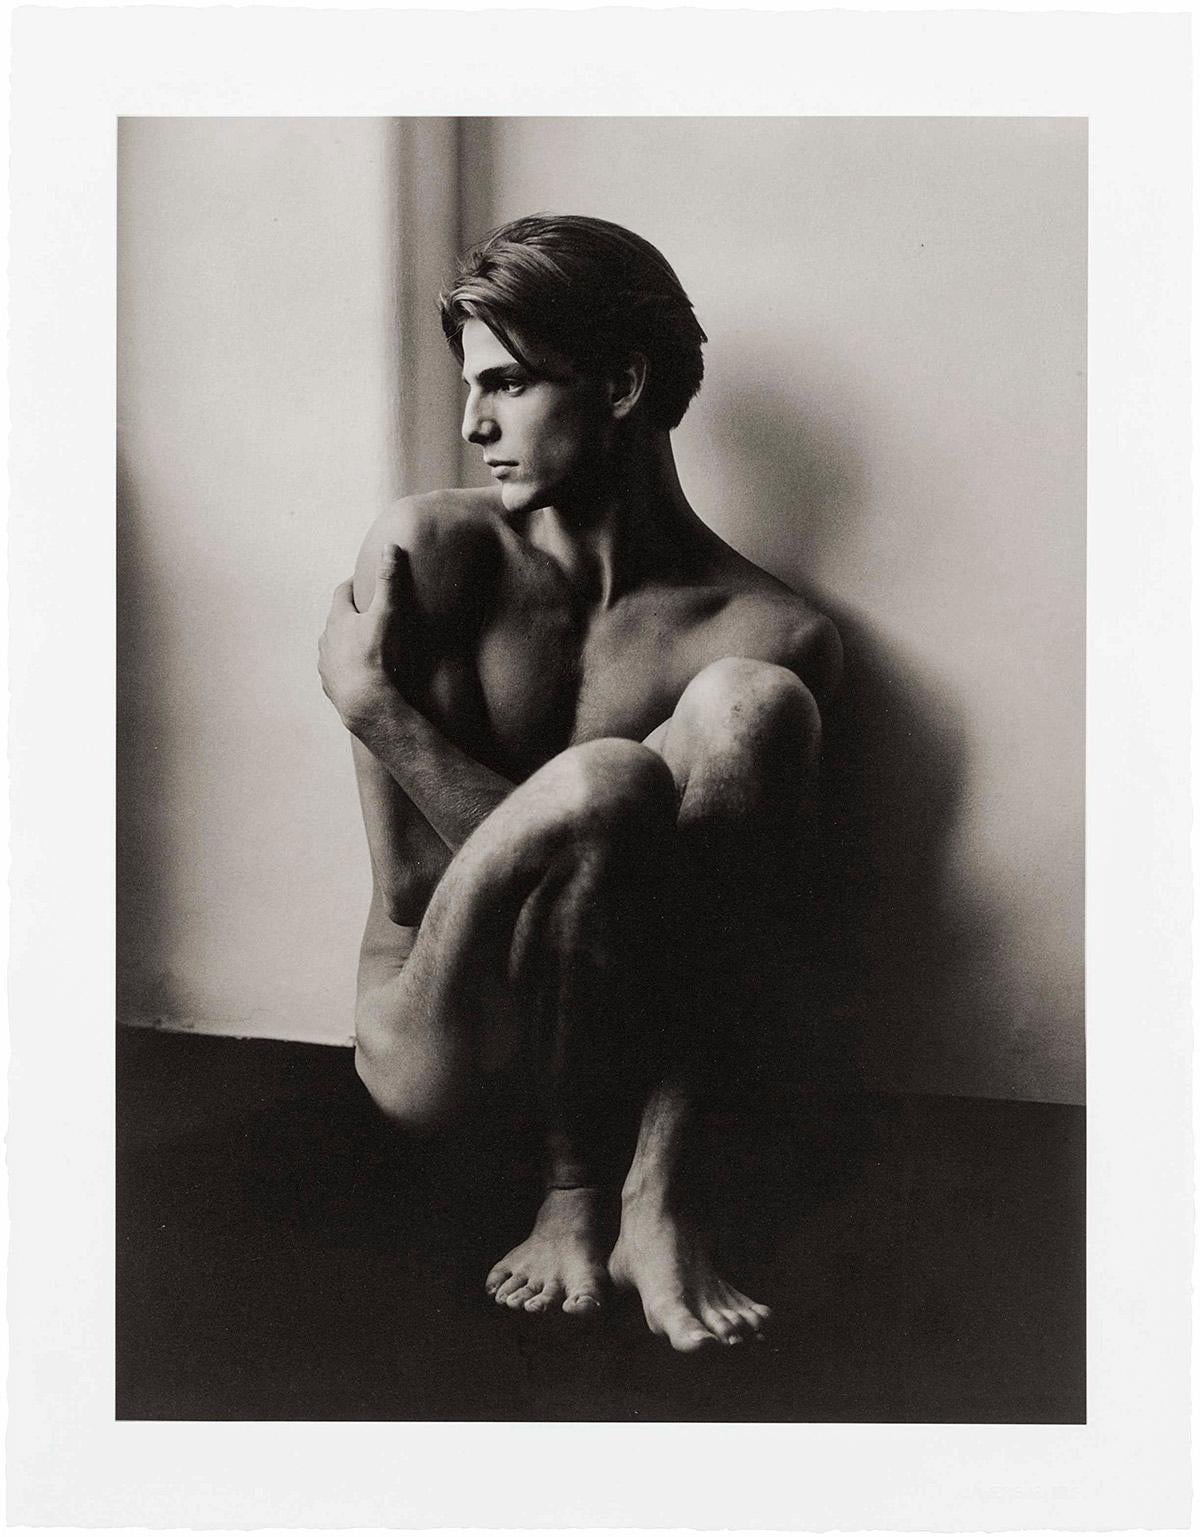 Stephano Seated, Milan - Contemporary Photograph by Herb Ritts